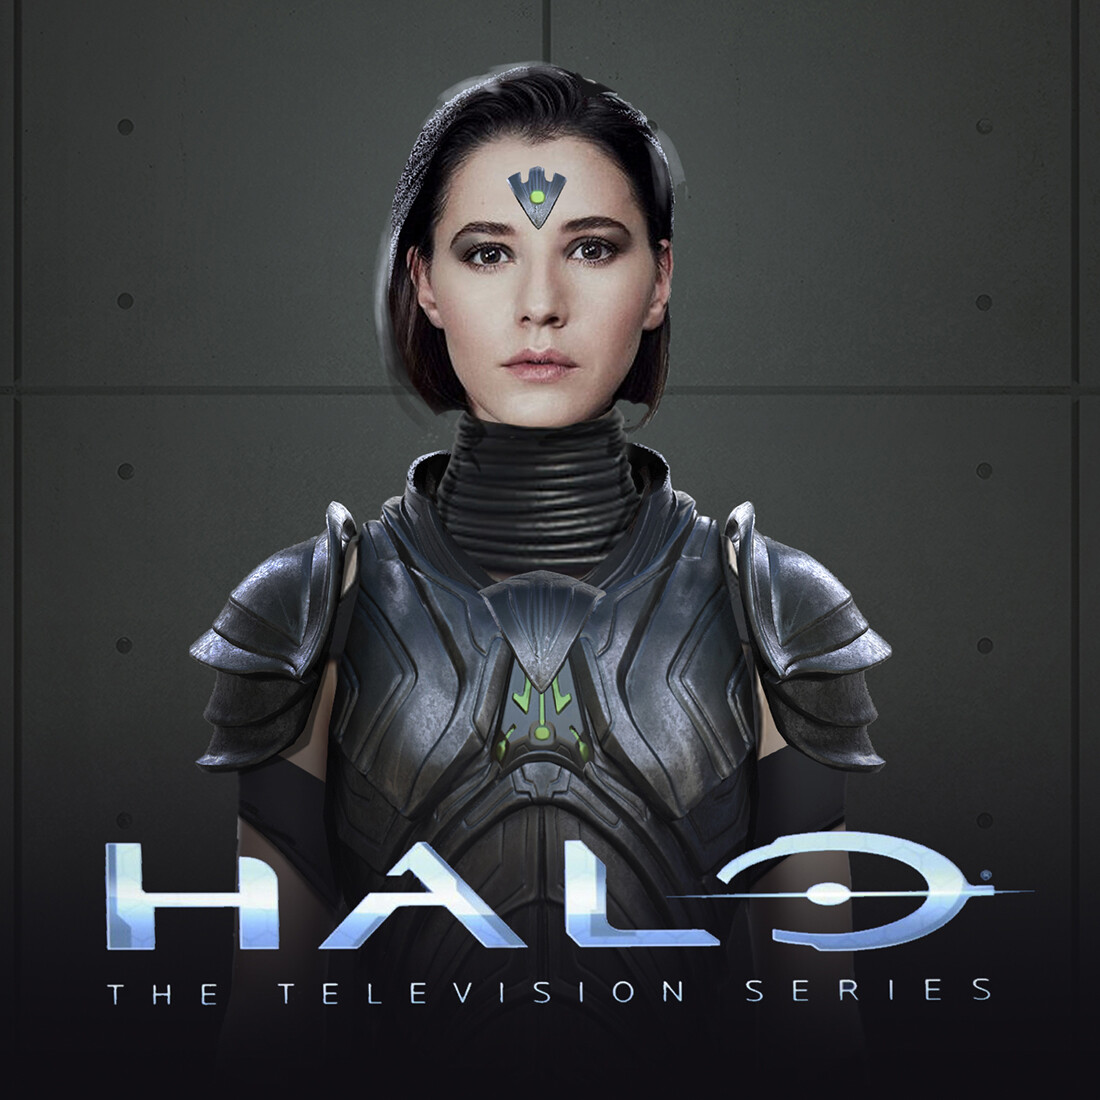 Makee (Halo Television series, early costume concepts)